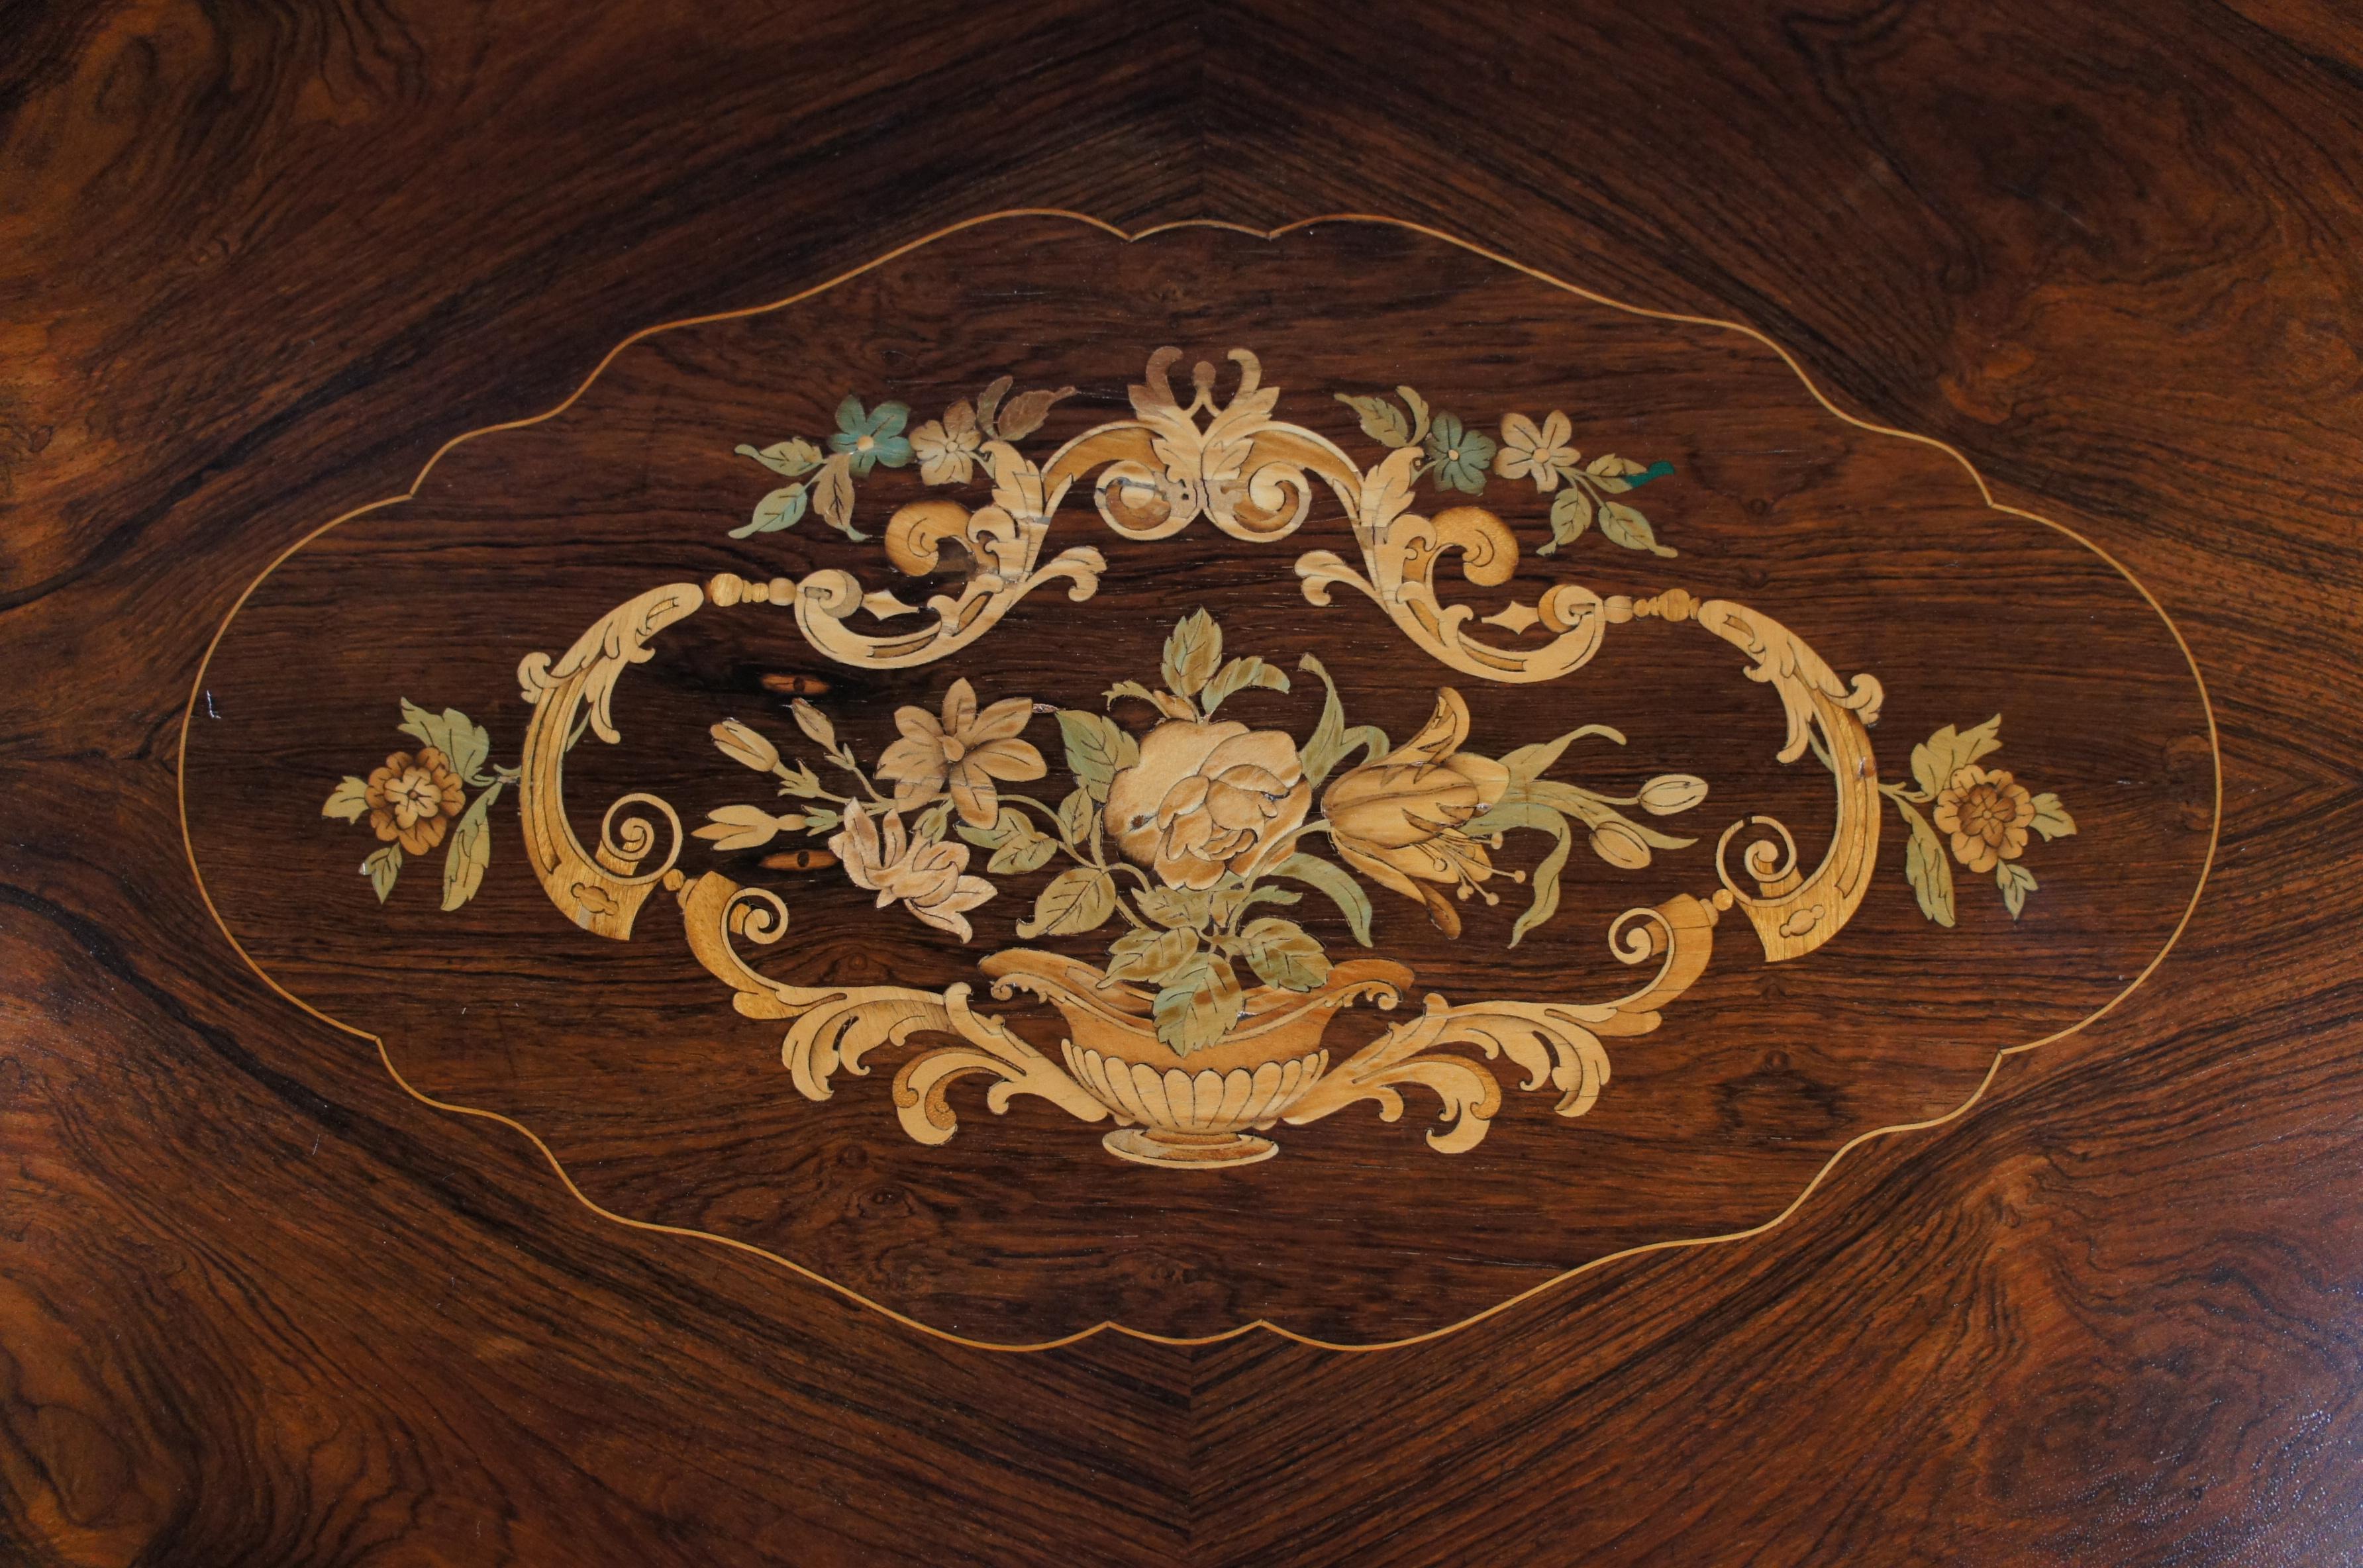 Antique American Renaissance Revival Serpentine Walnut Marquetry Center Table For Sale 2